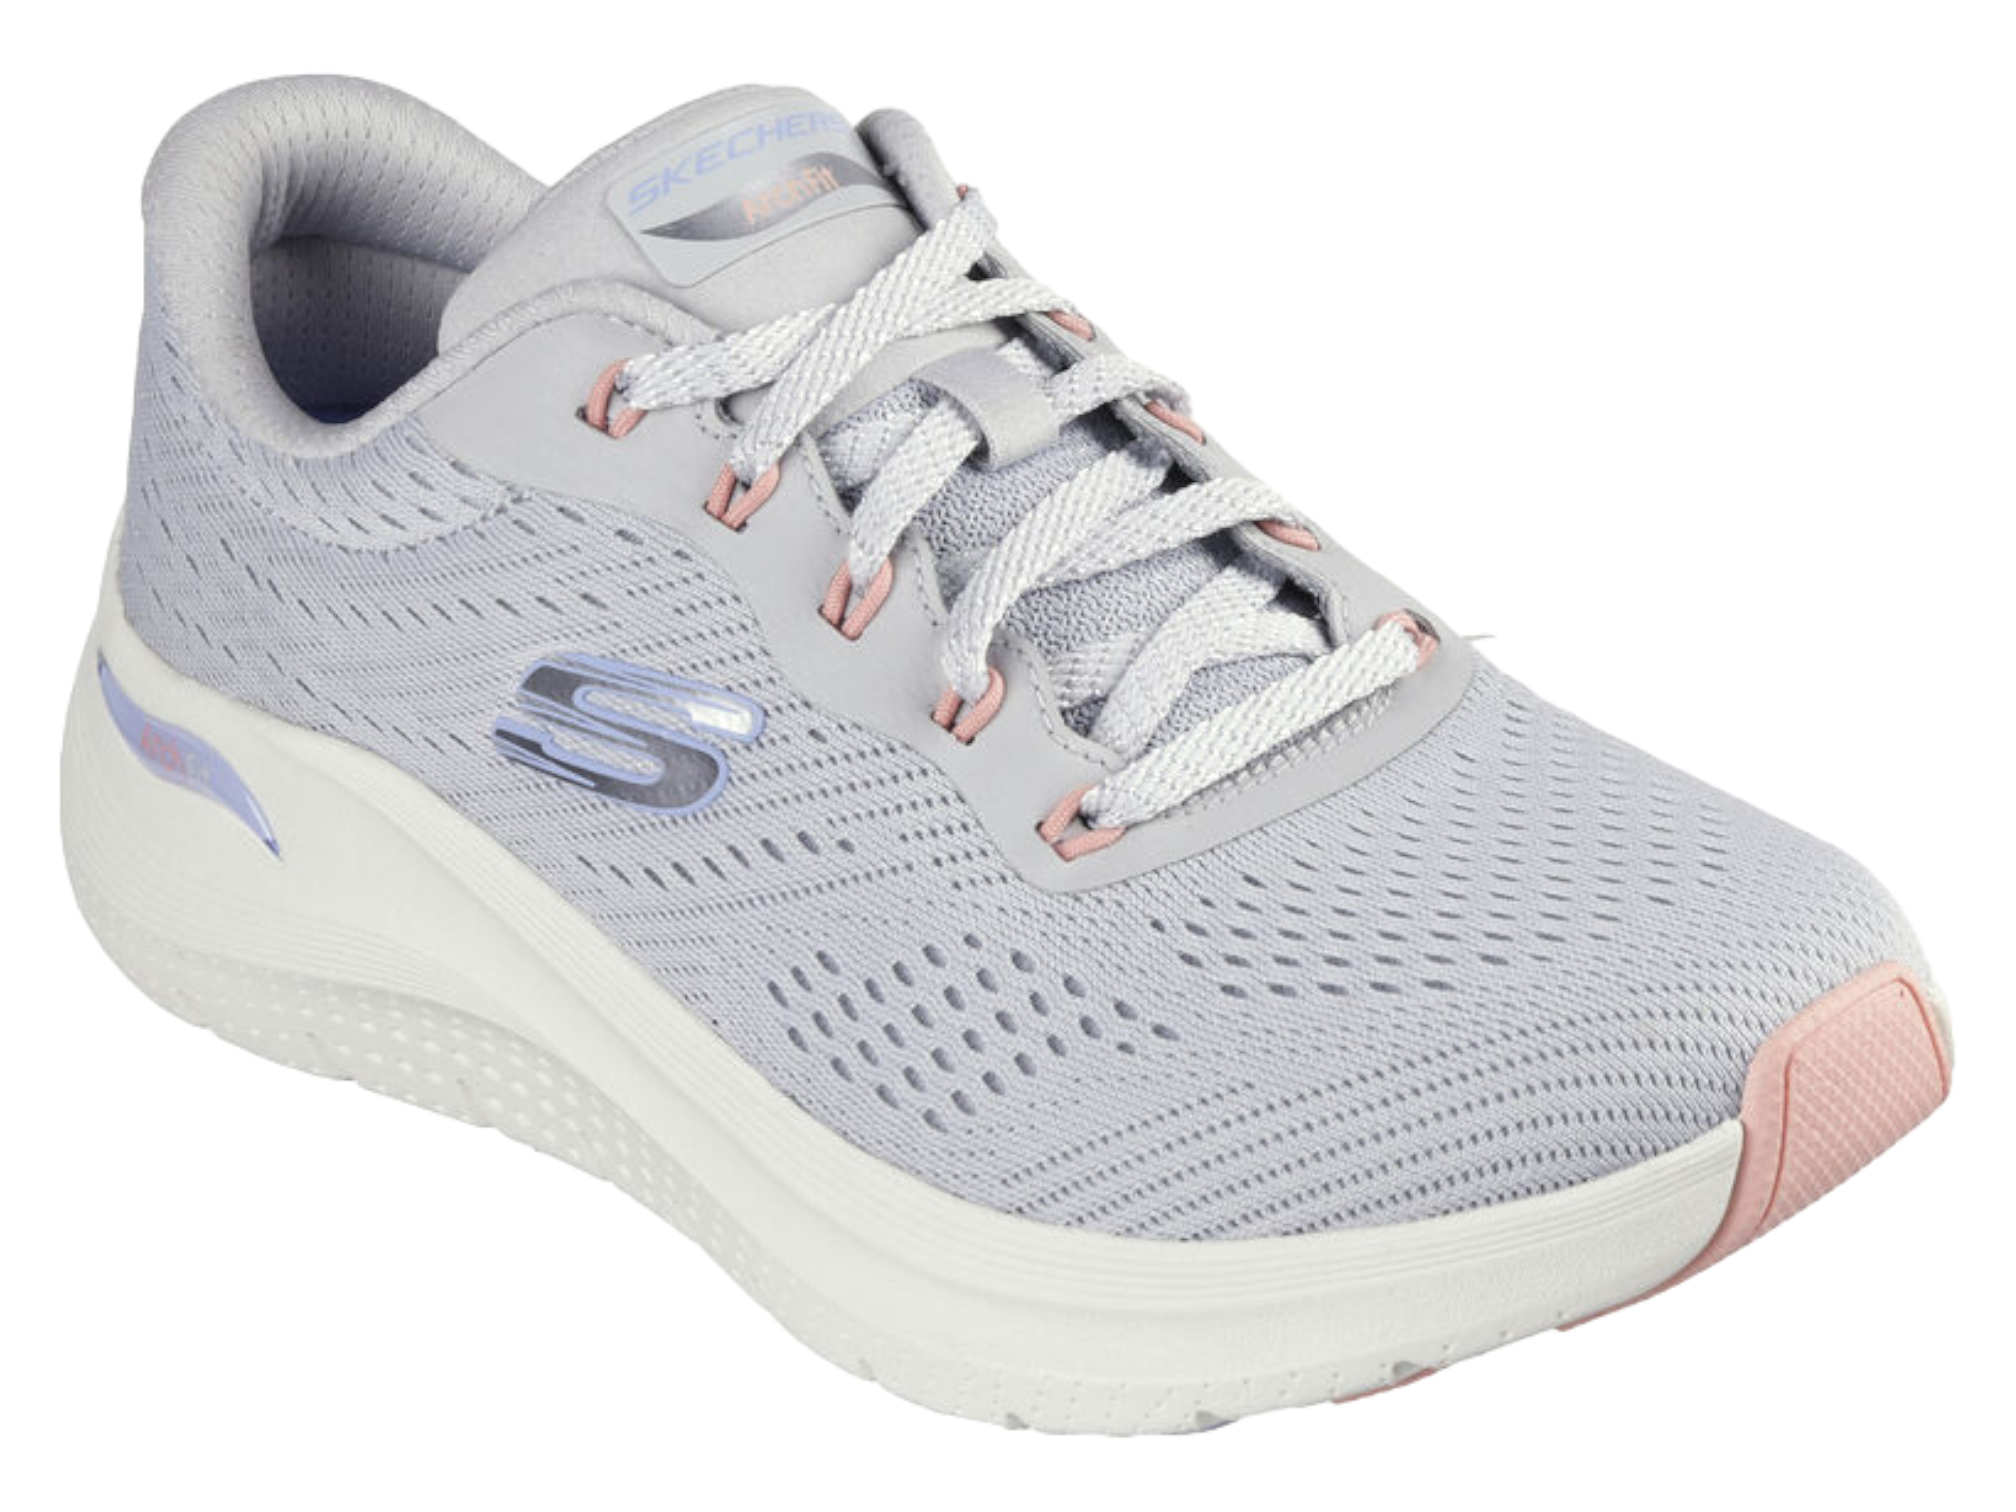 SKECHERS_150051_ARCH_FIT_2.0_BIG_LEAGUE_LIGHT_GREY_MULTI_ANGLE-Photoroom.png